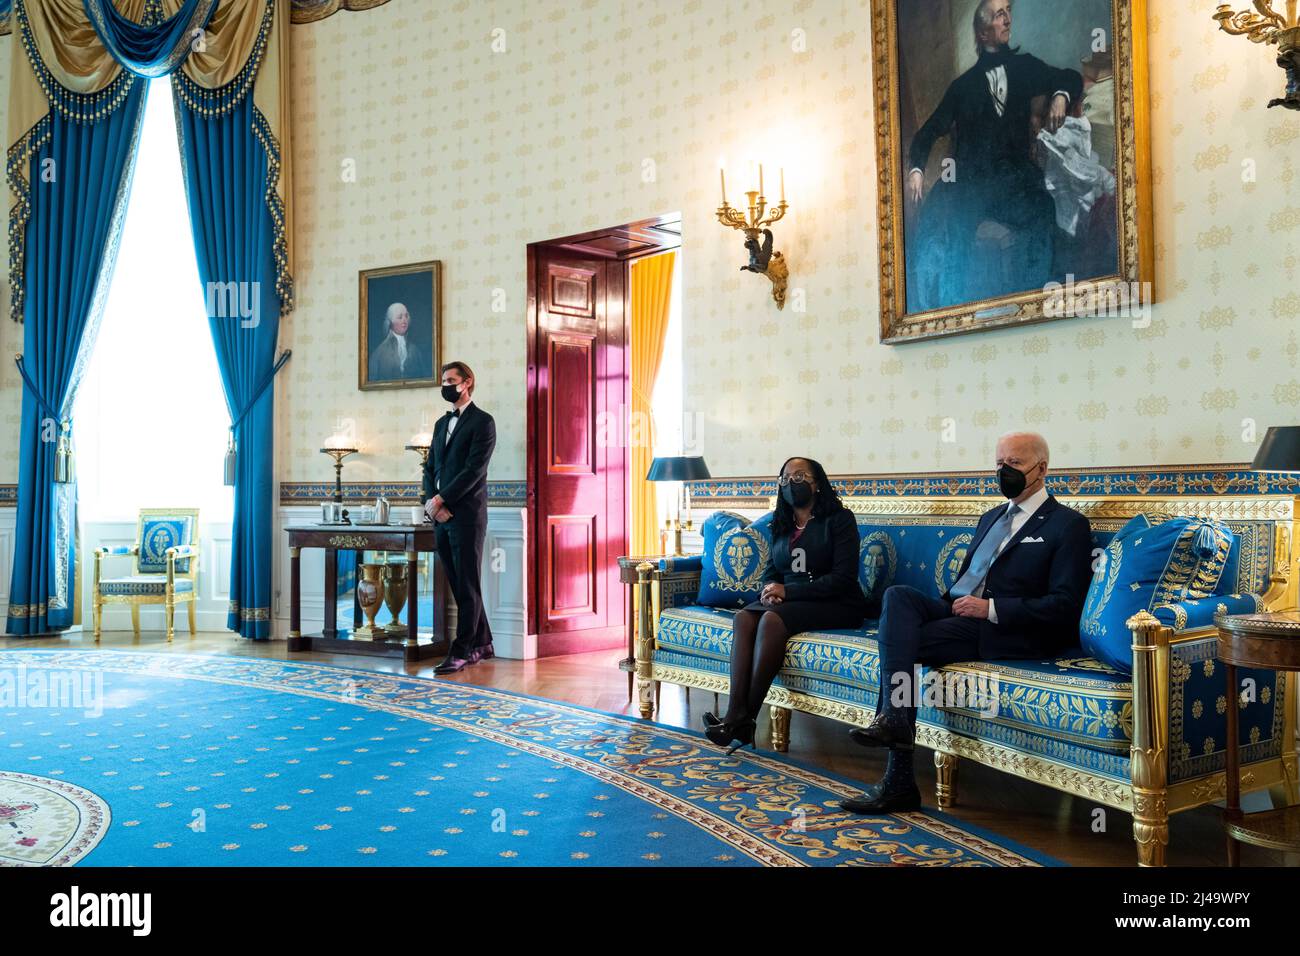 President Joe Biden waits in the Blue Room with Judge Ketanji Brown Jackson, Friday, February 25, 2022, prior to announcing her nomination to the U.S. Supreme Court. (Official White House Photo by Adam Schultz) Stock Photo